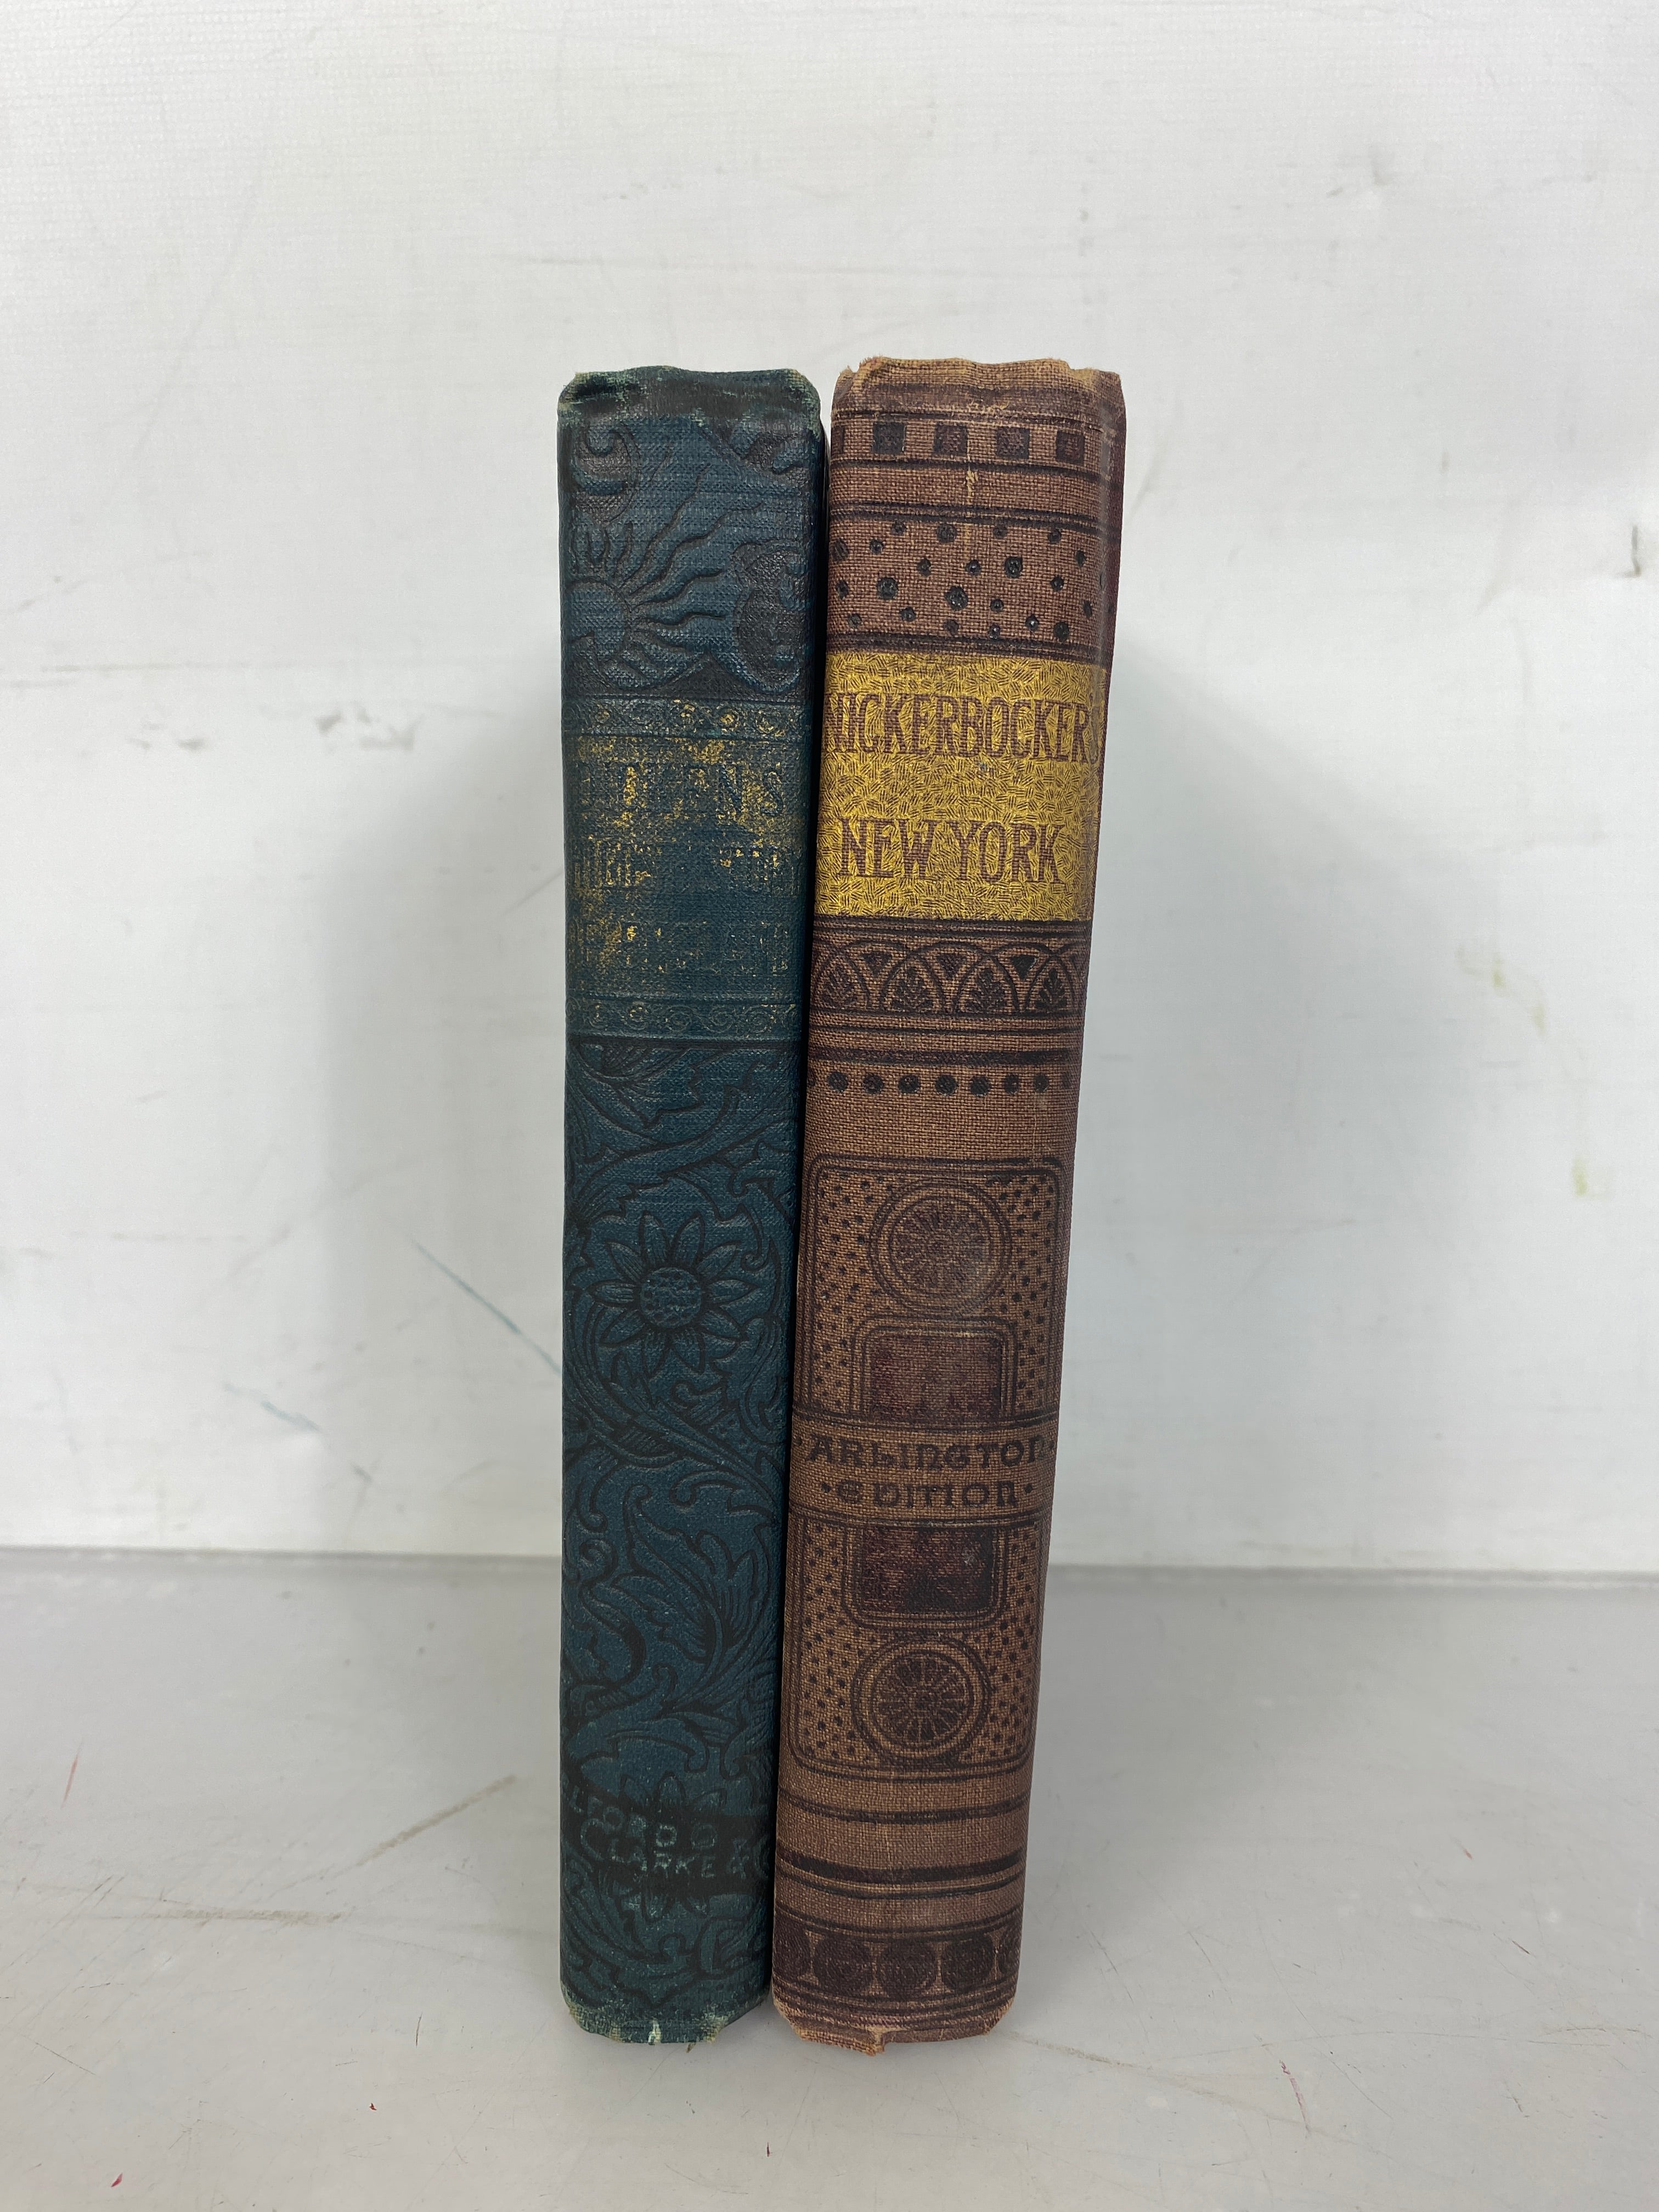 Lot of 2 Antique Classic History Books: A Child's History of England by Charles Dickens and Knickerbocker's History of New York by Washington Irving 1889-1890 HC